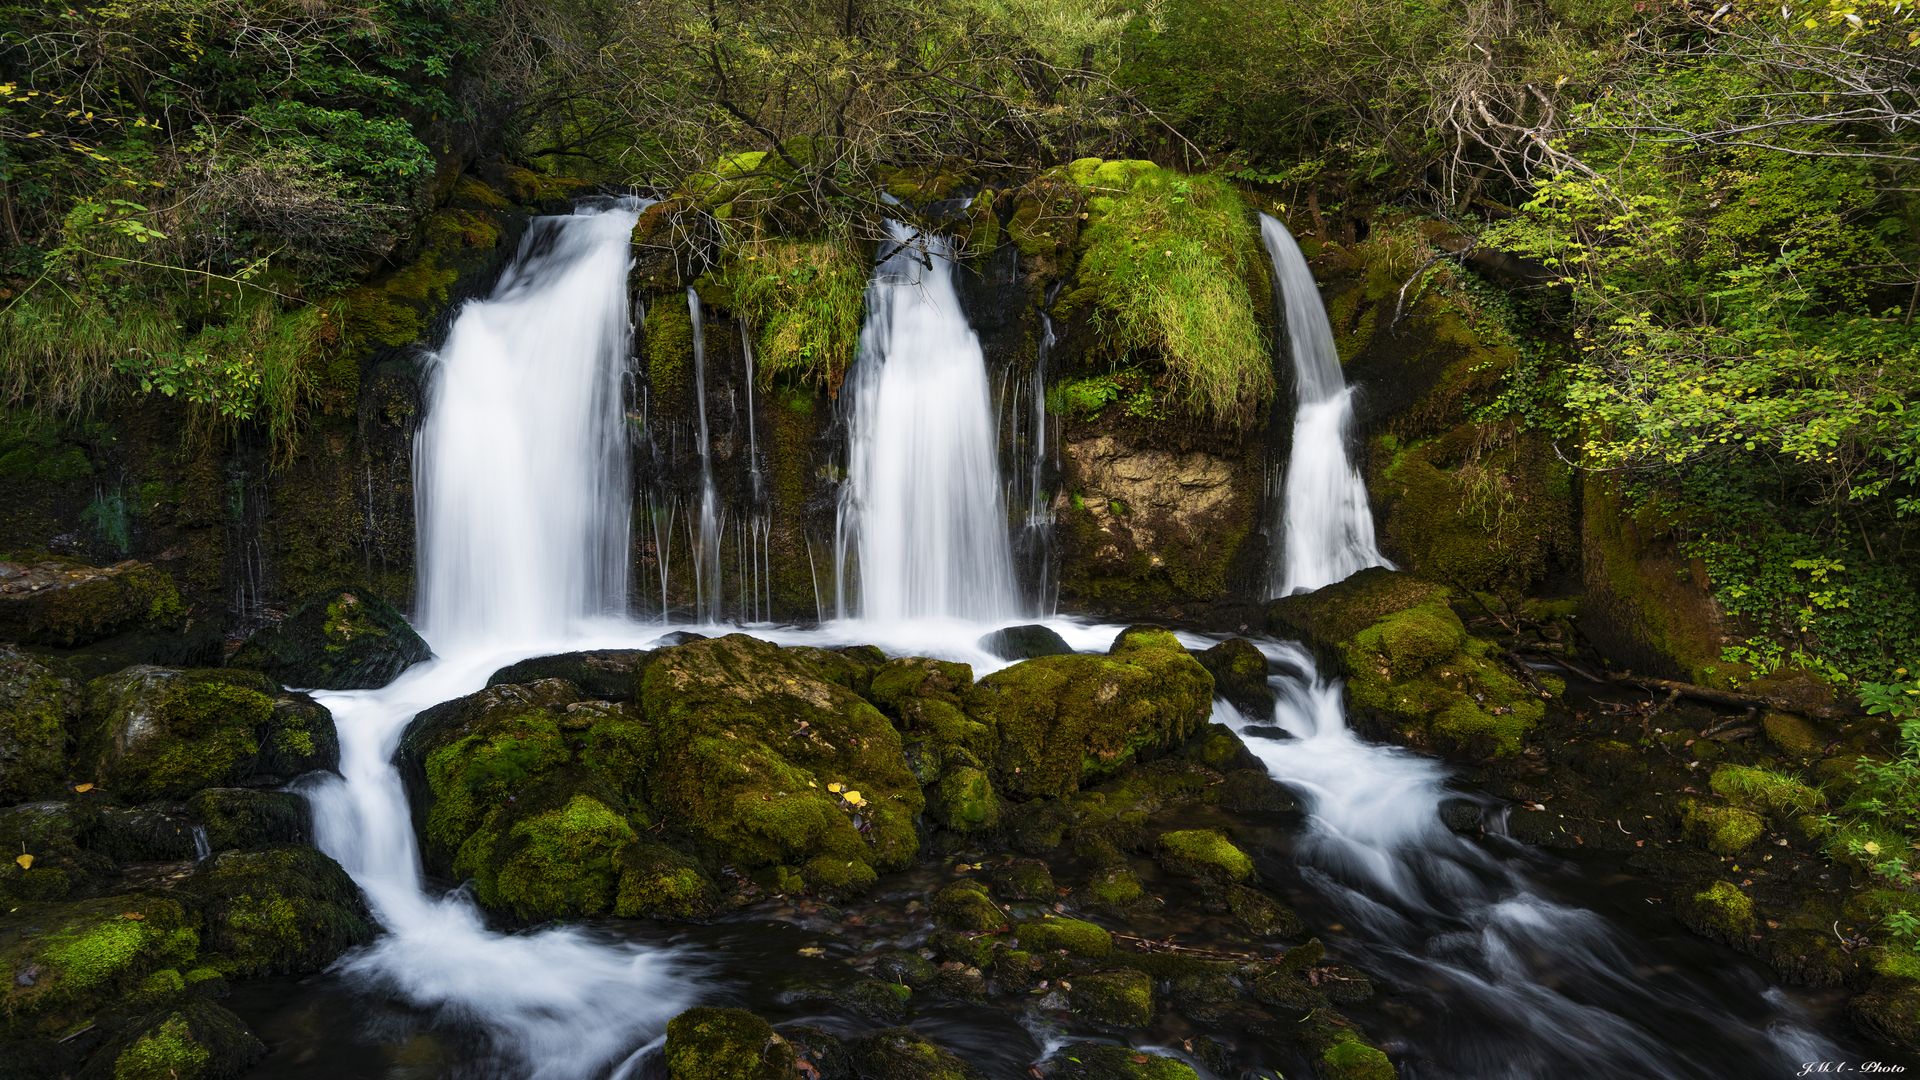 General 1920x1080 nature landscape rocks forest trees moss water stream long exposure watermarked